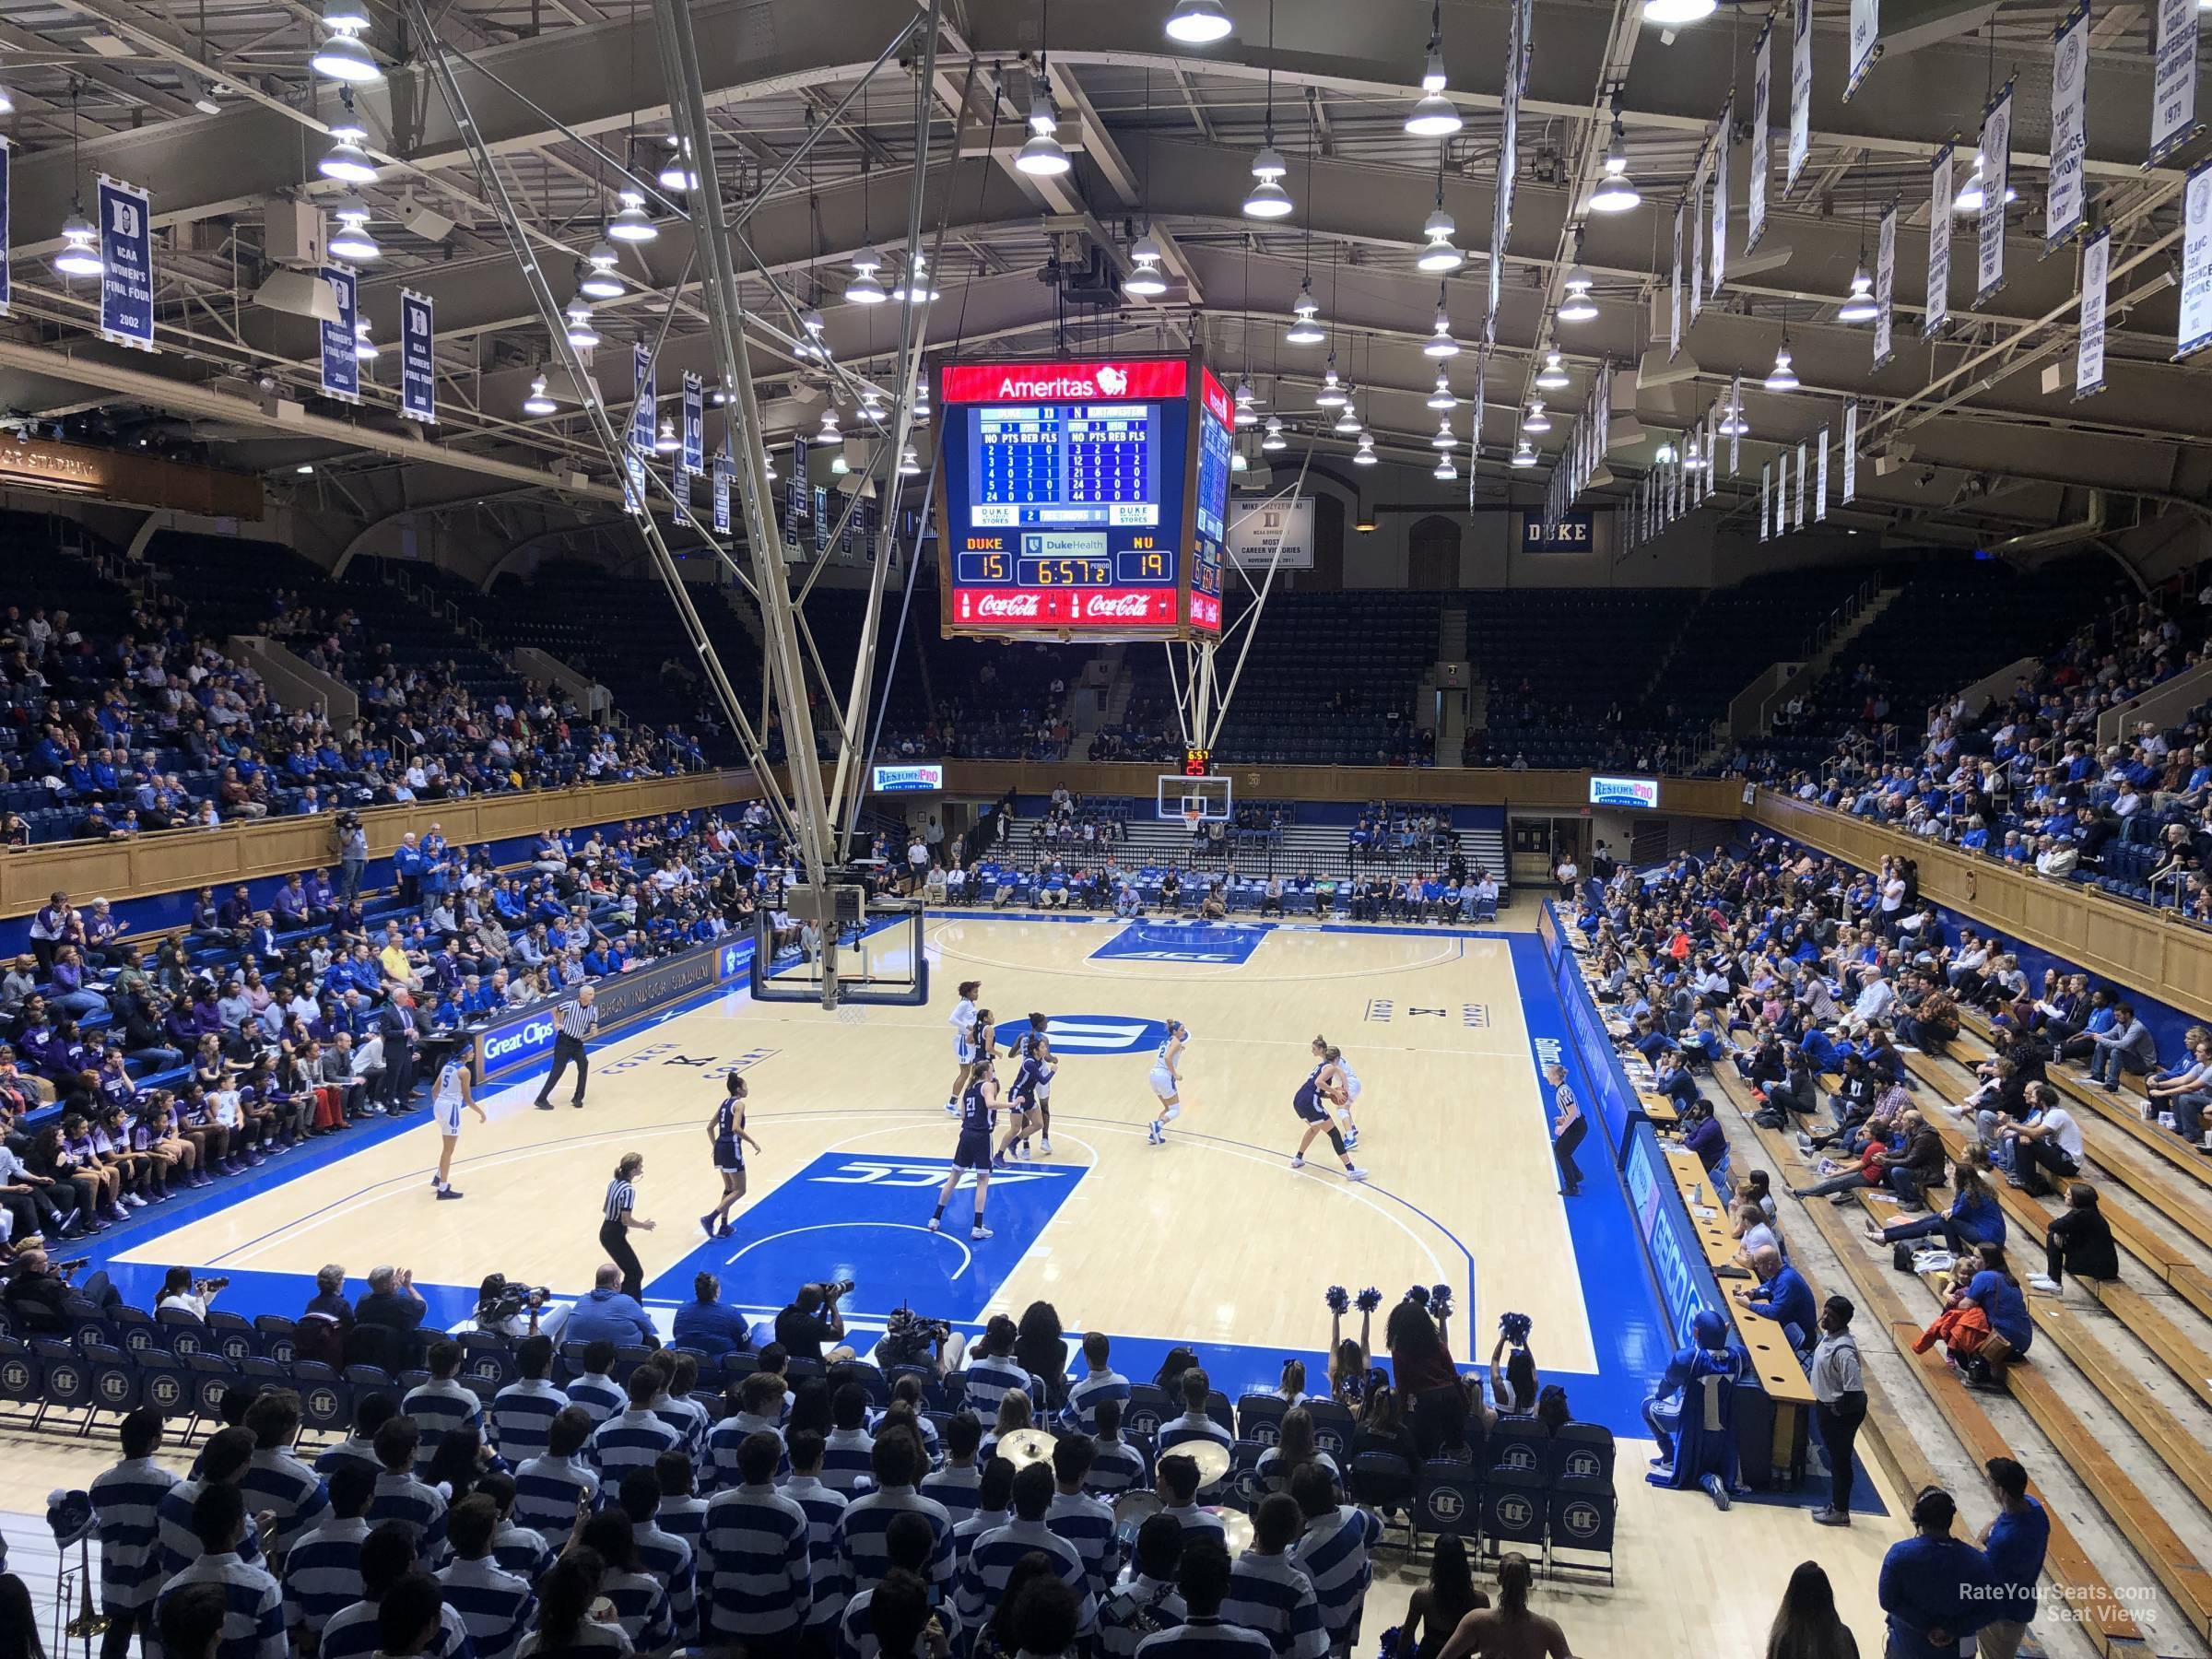 Section 11 at Cameron Indoor Arena - RateYourSeats.com